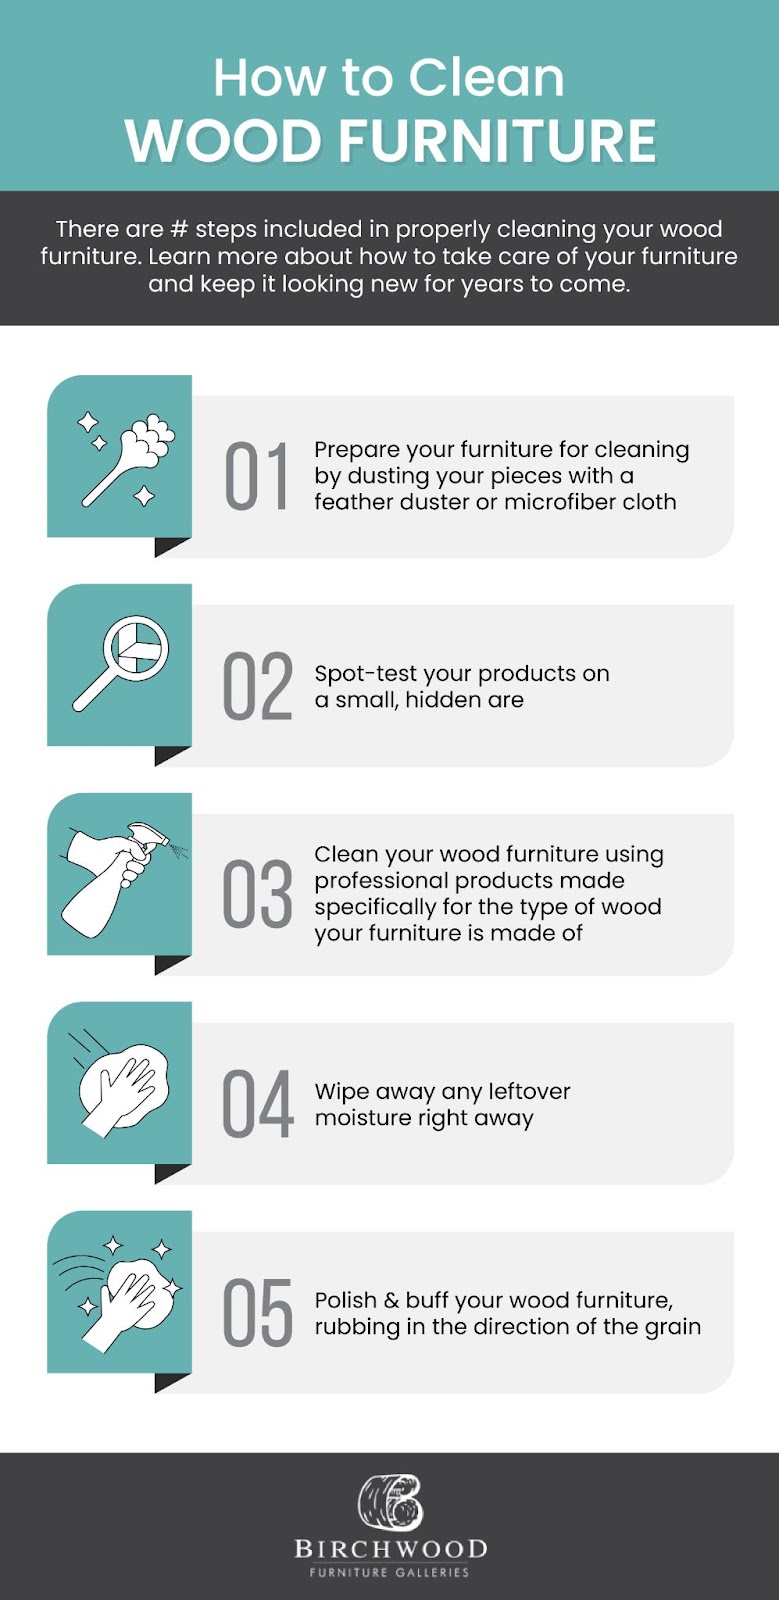 An infographic to demonstrate how to clean wood furniture from Birchwood Furniture Calgary.